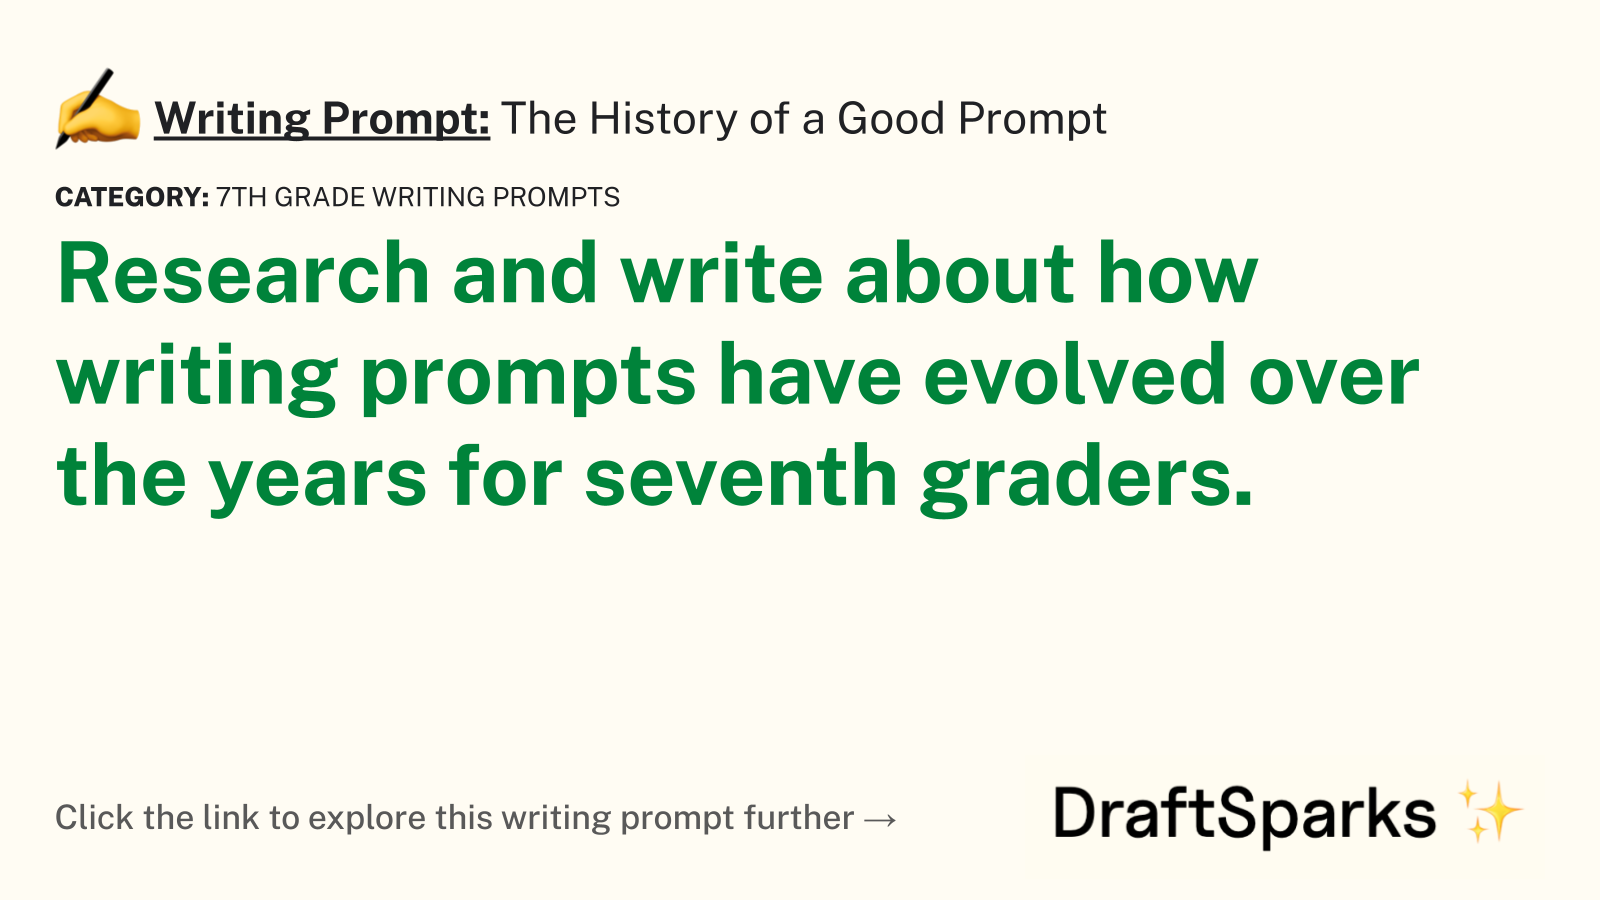 The History of a Good Prompt